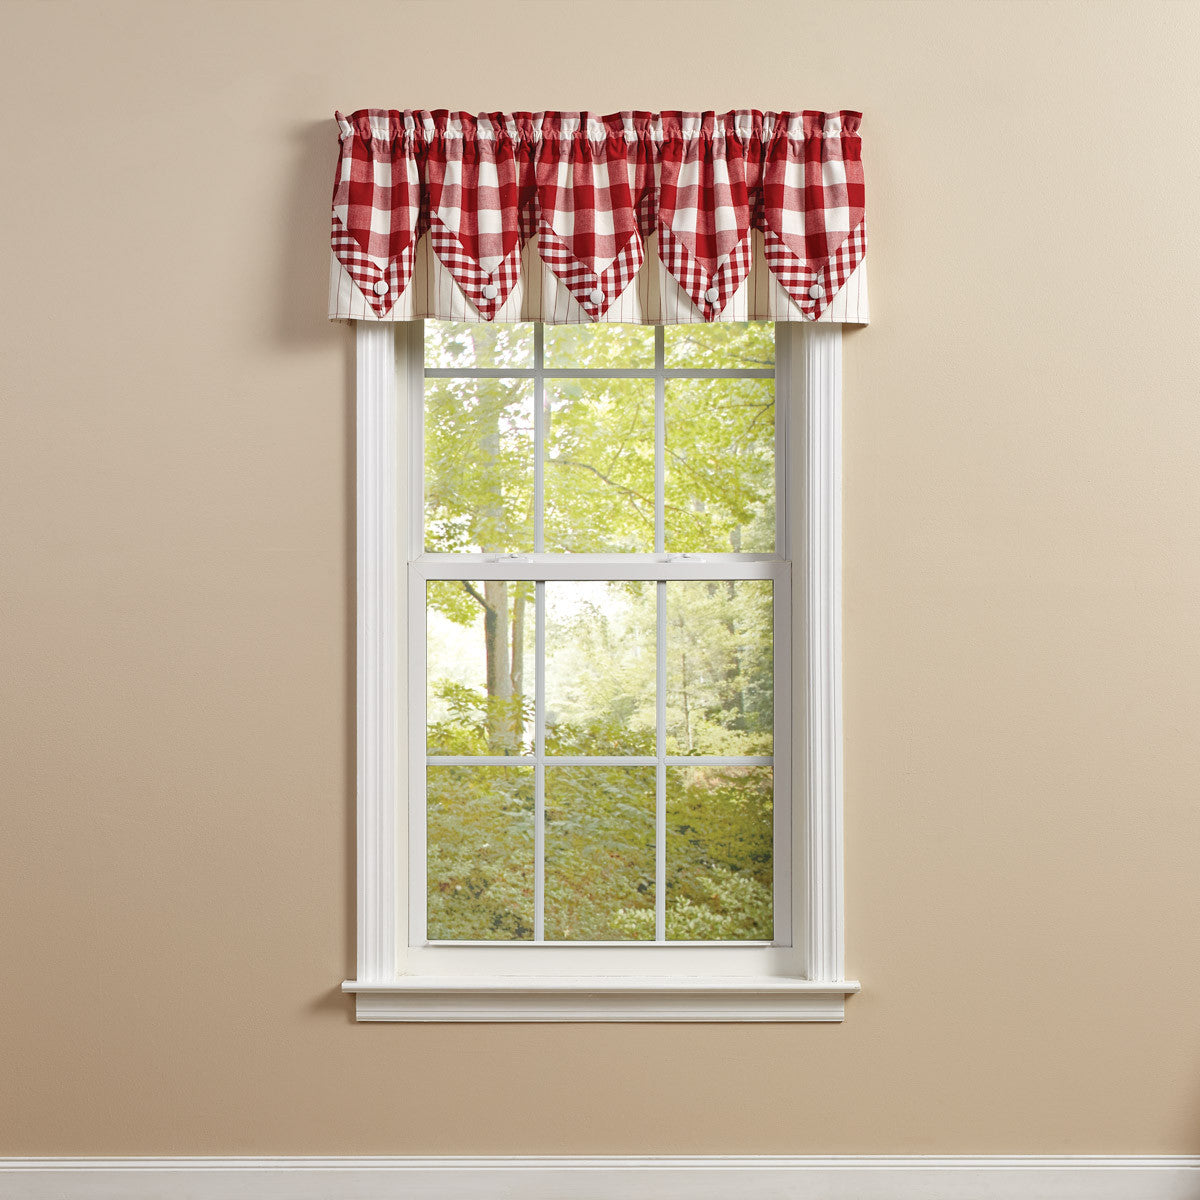 WICKLOW LINED POINT VALANCE RED 72X15 WINDOW